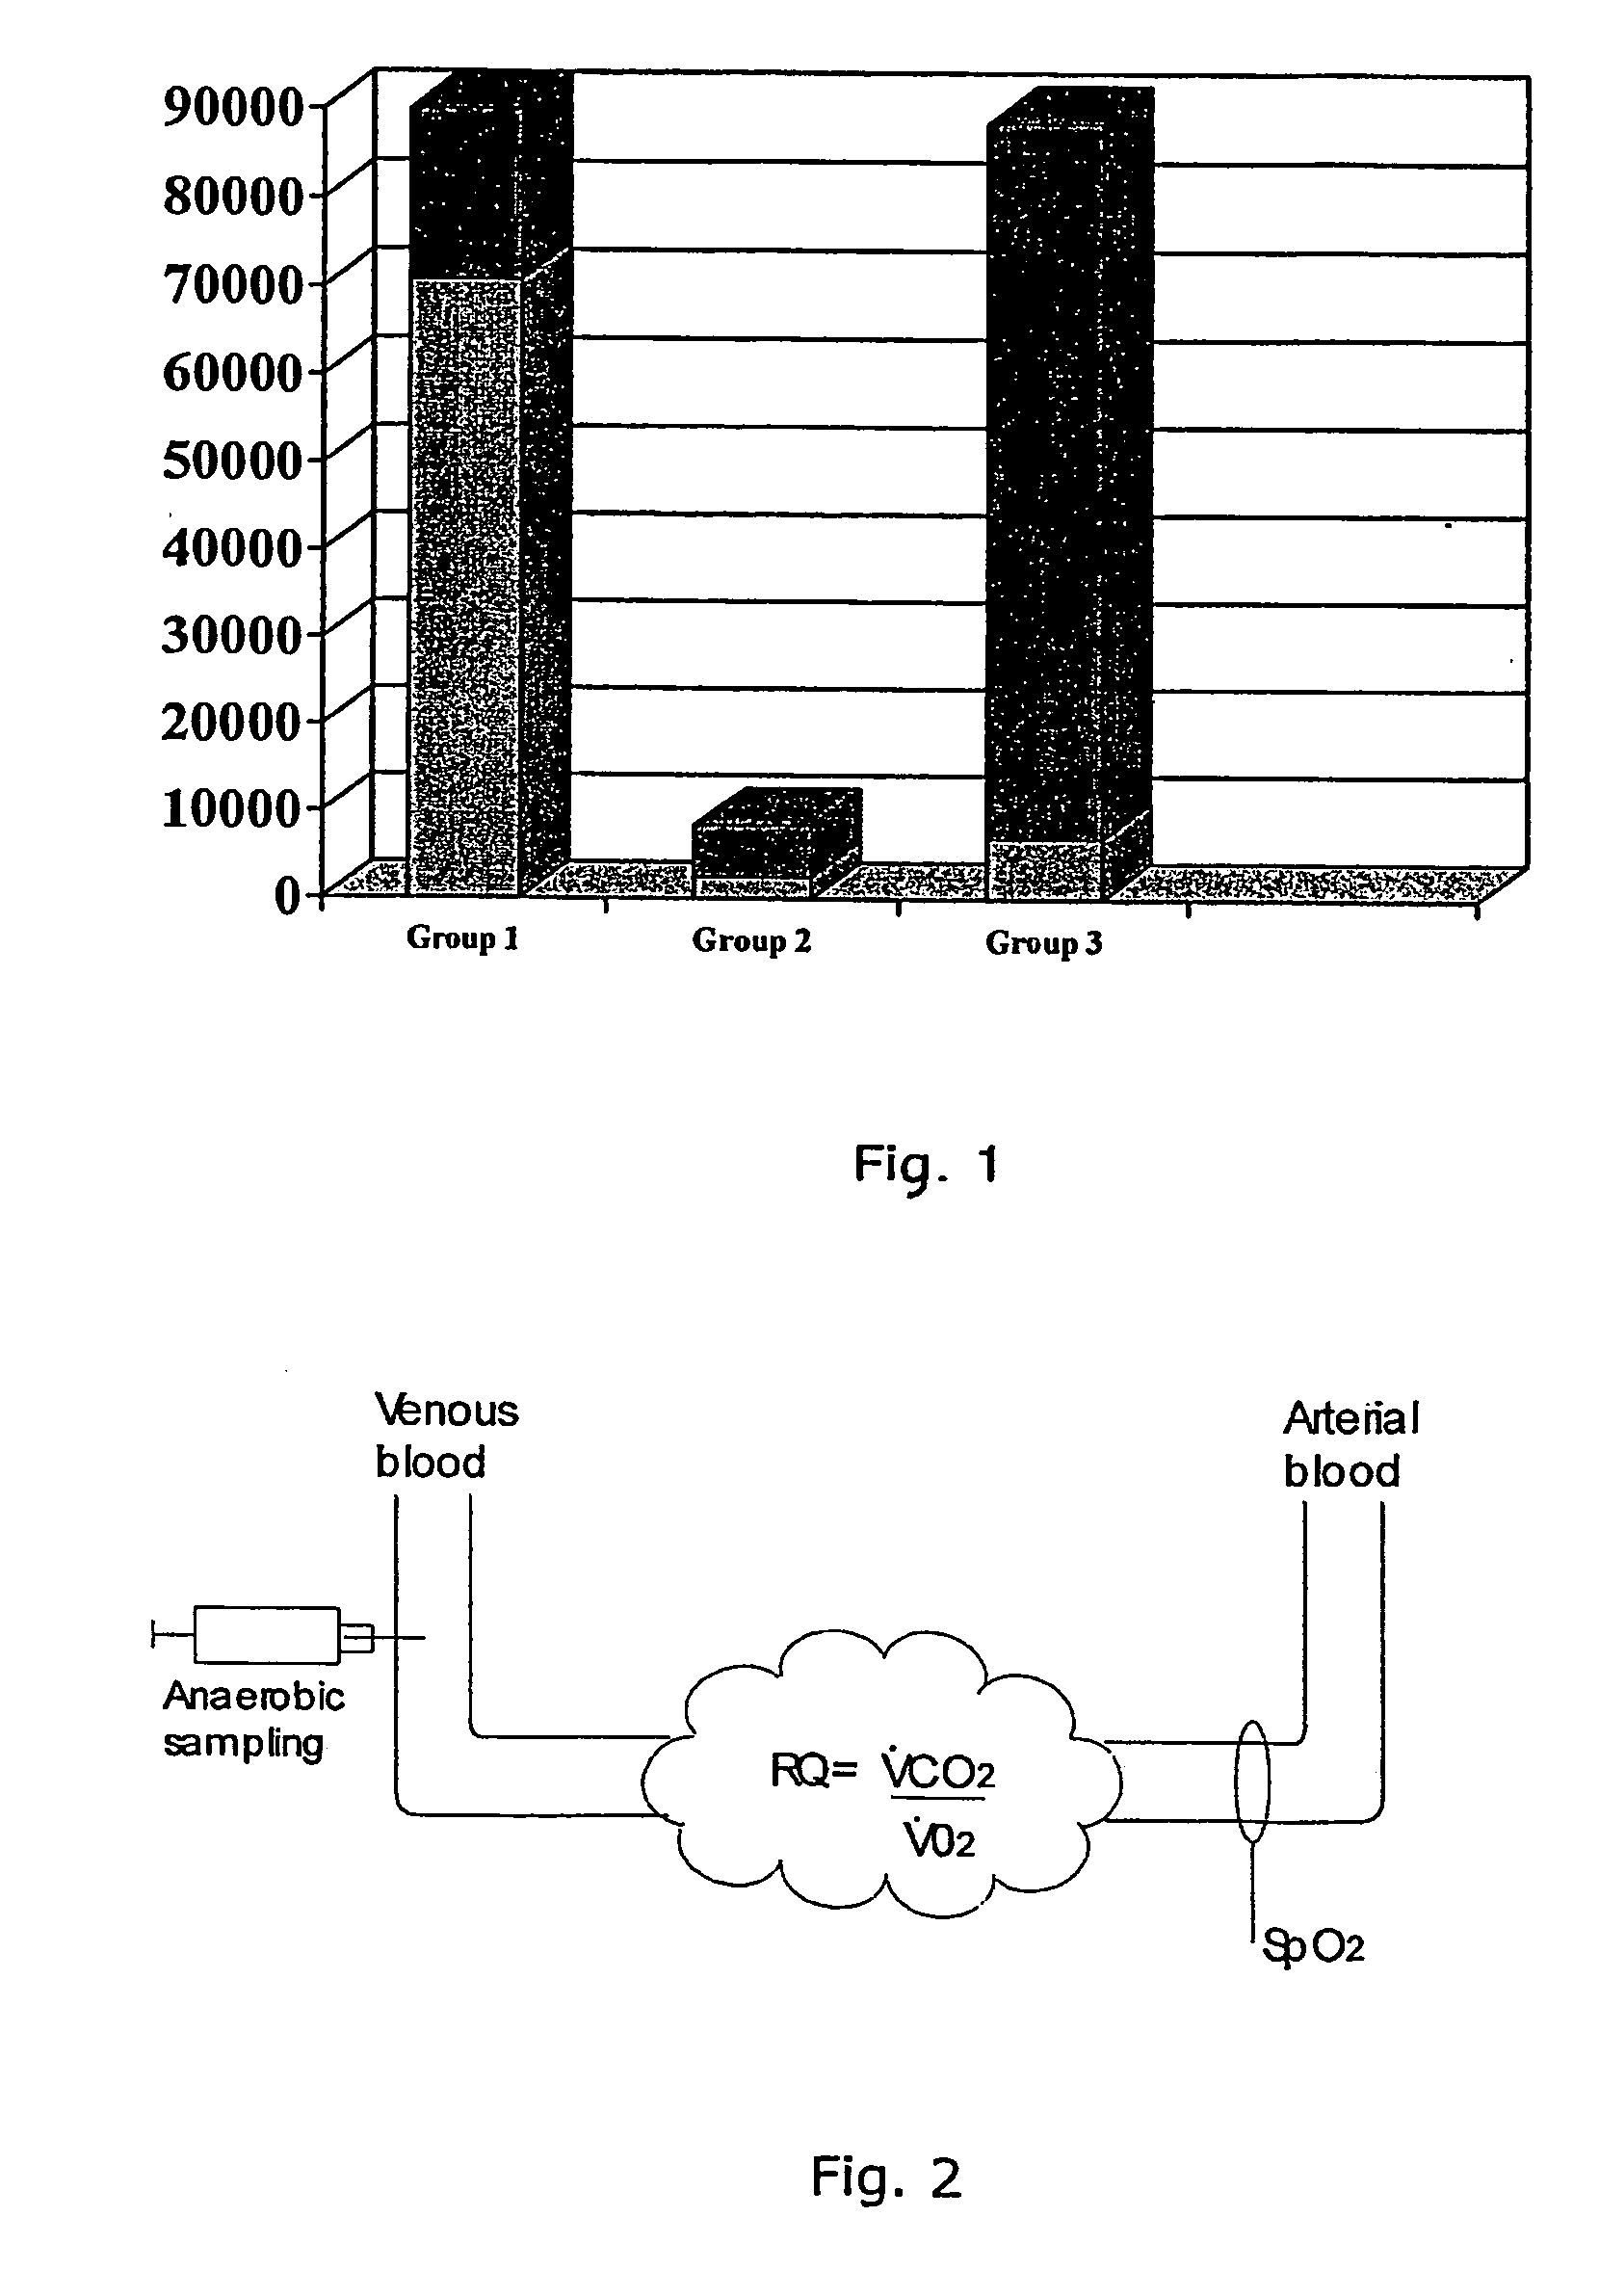 Method for converting venous blood values to arterial blood values, system for utilising said method and devices for such system